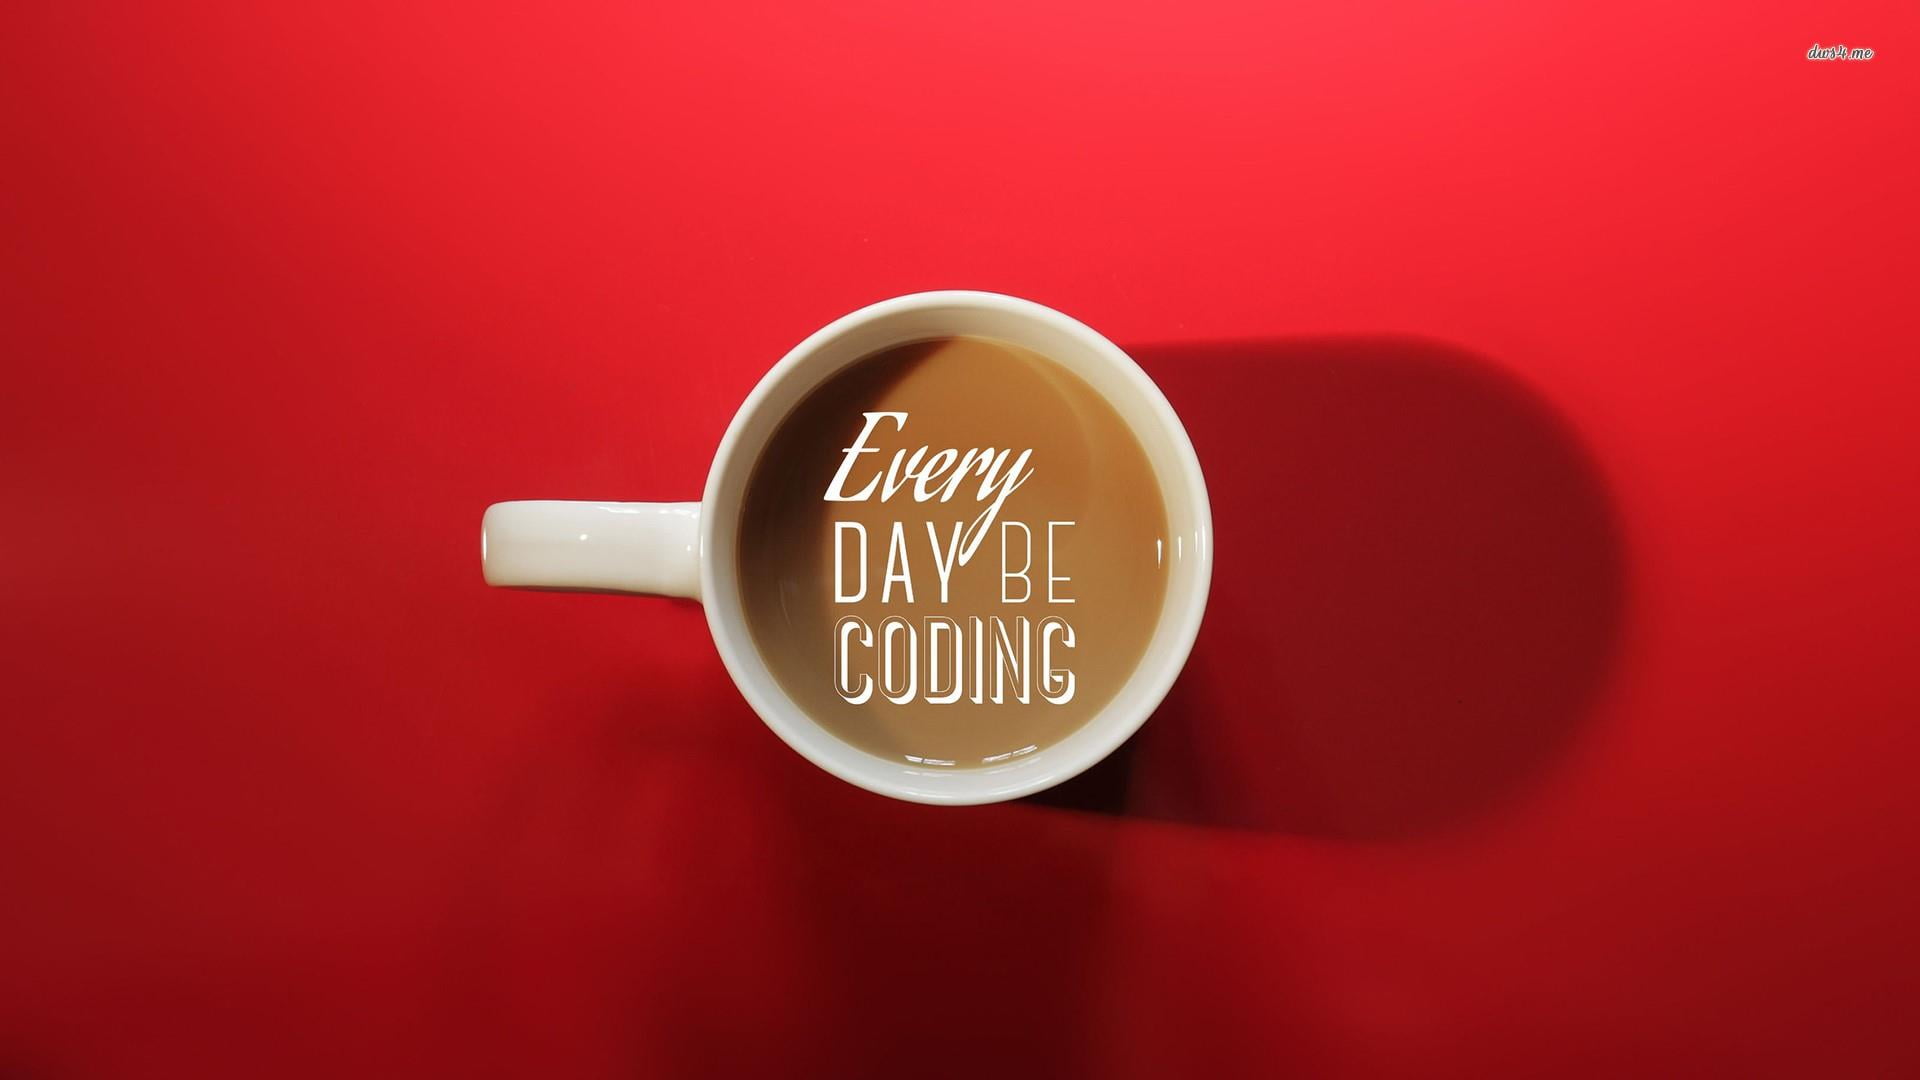 every, aim(adult), day, be, coding, quotes, red, studio shot